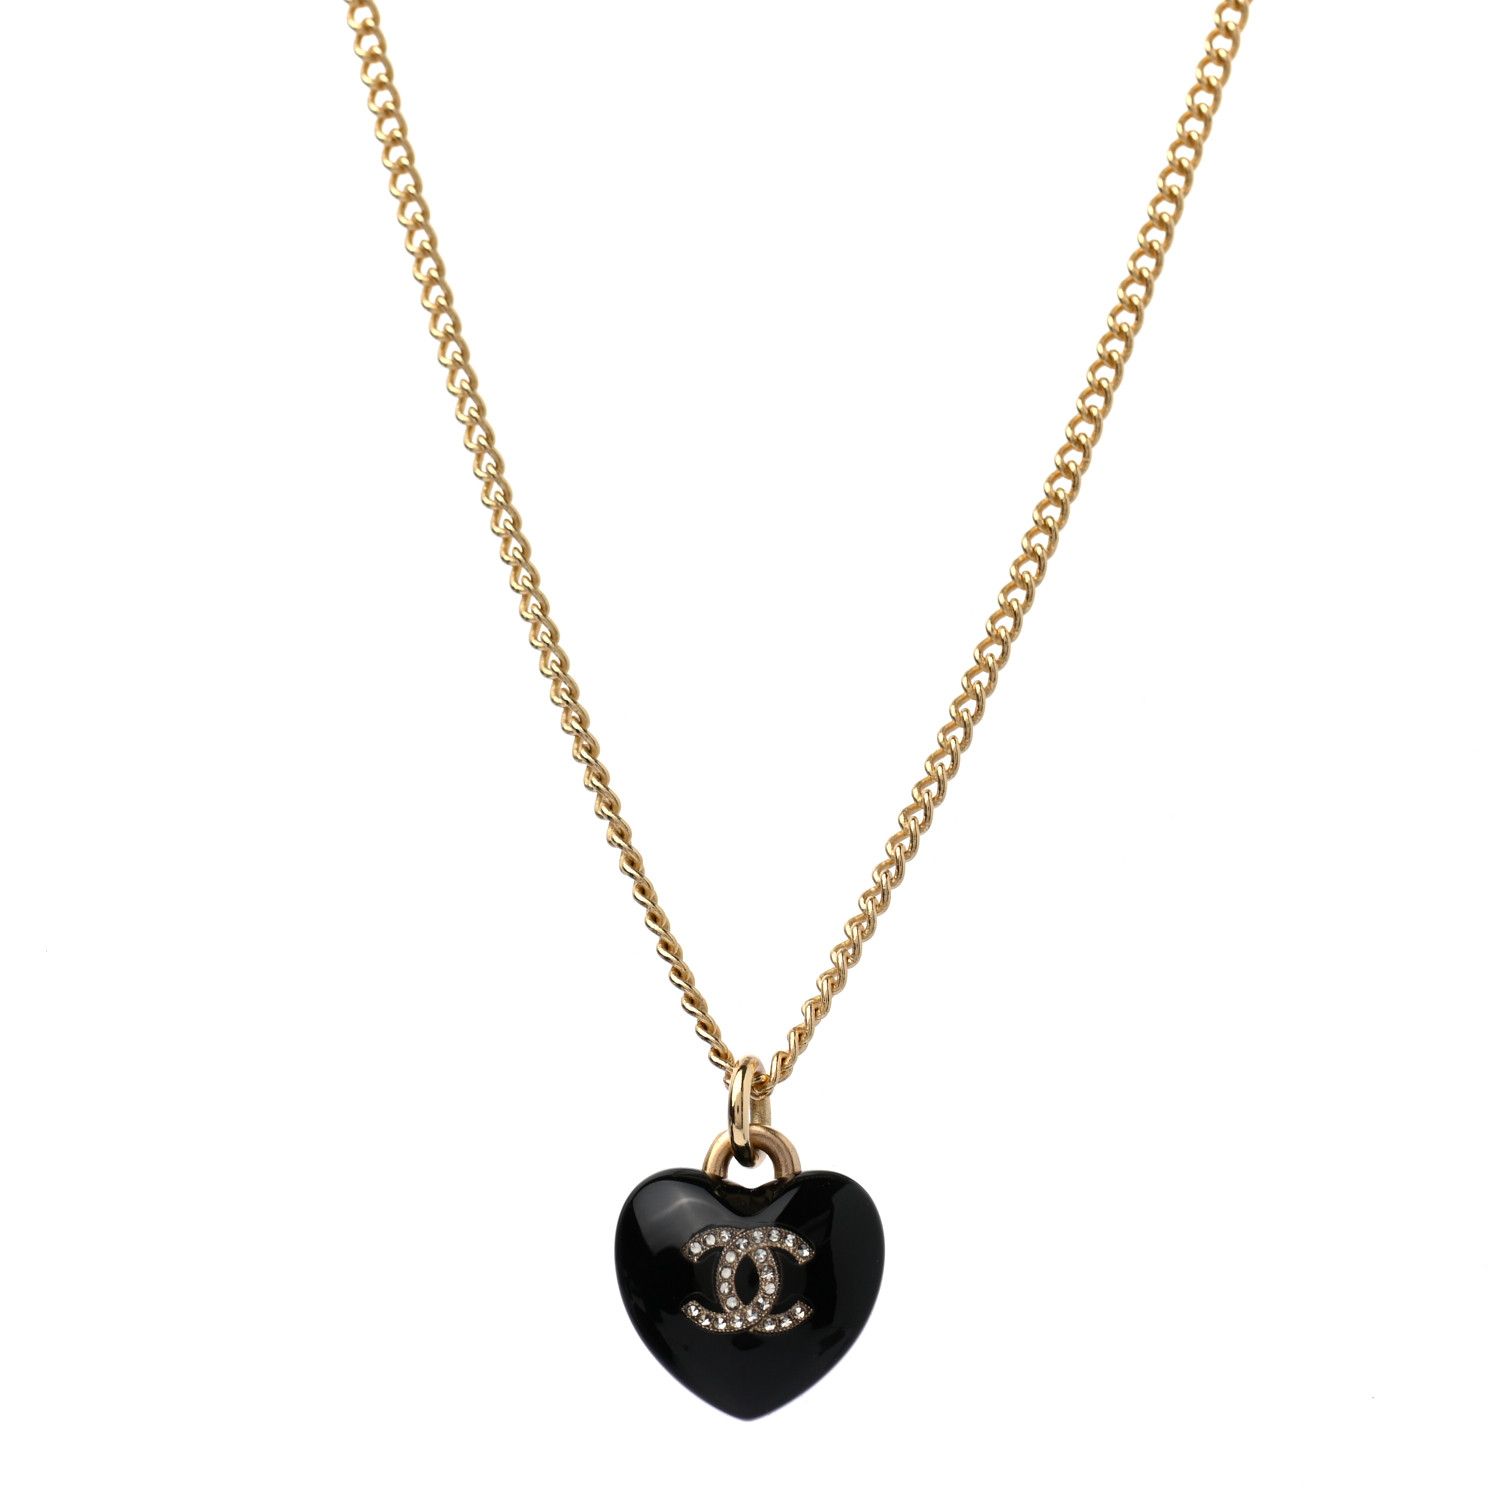 CHANEL

Resin Crystal CC Heart Necklace Black Gold | Fashionphile